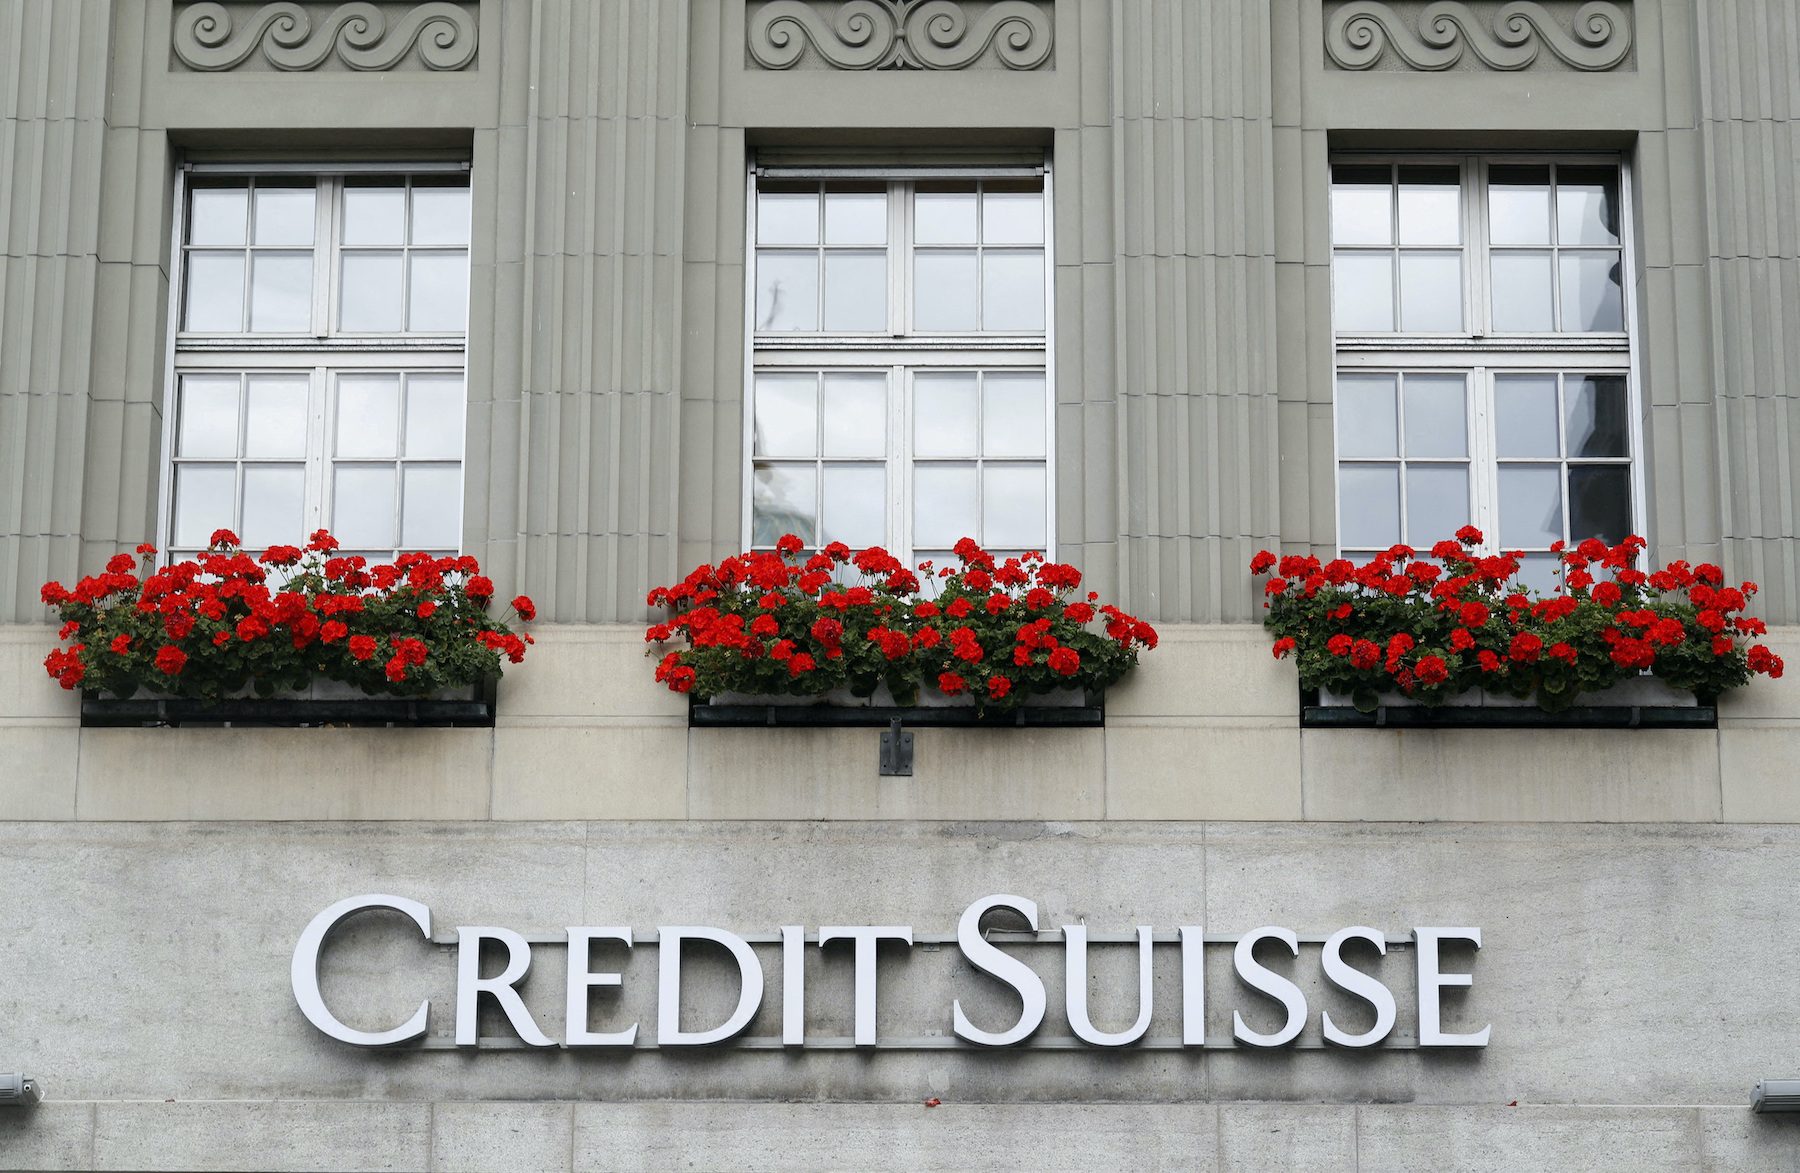 EXPLAINER: Credit Suisse stuck in spotlight ahead of strategy shift